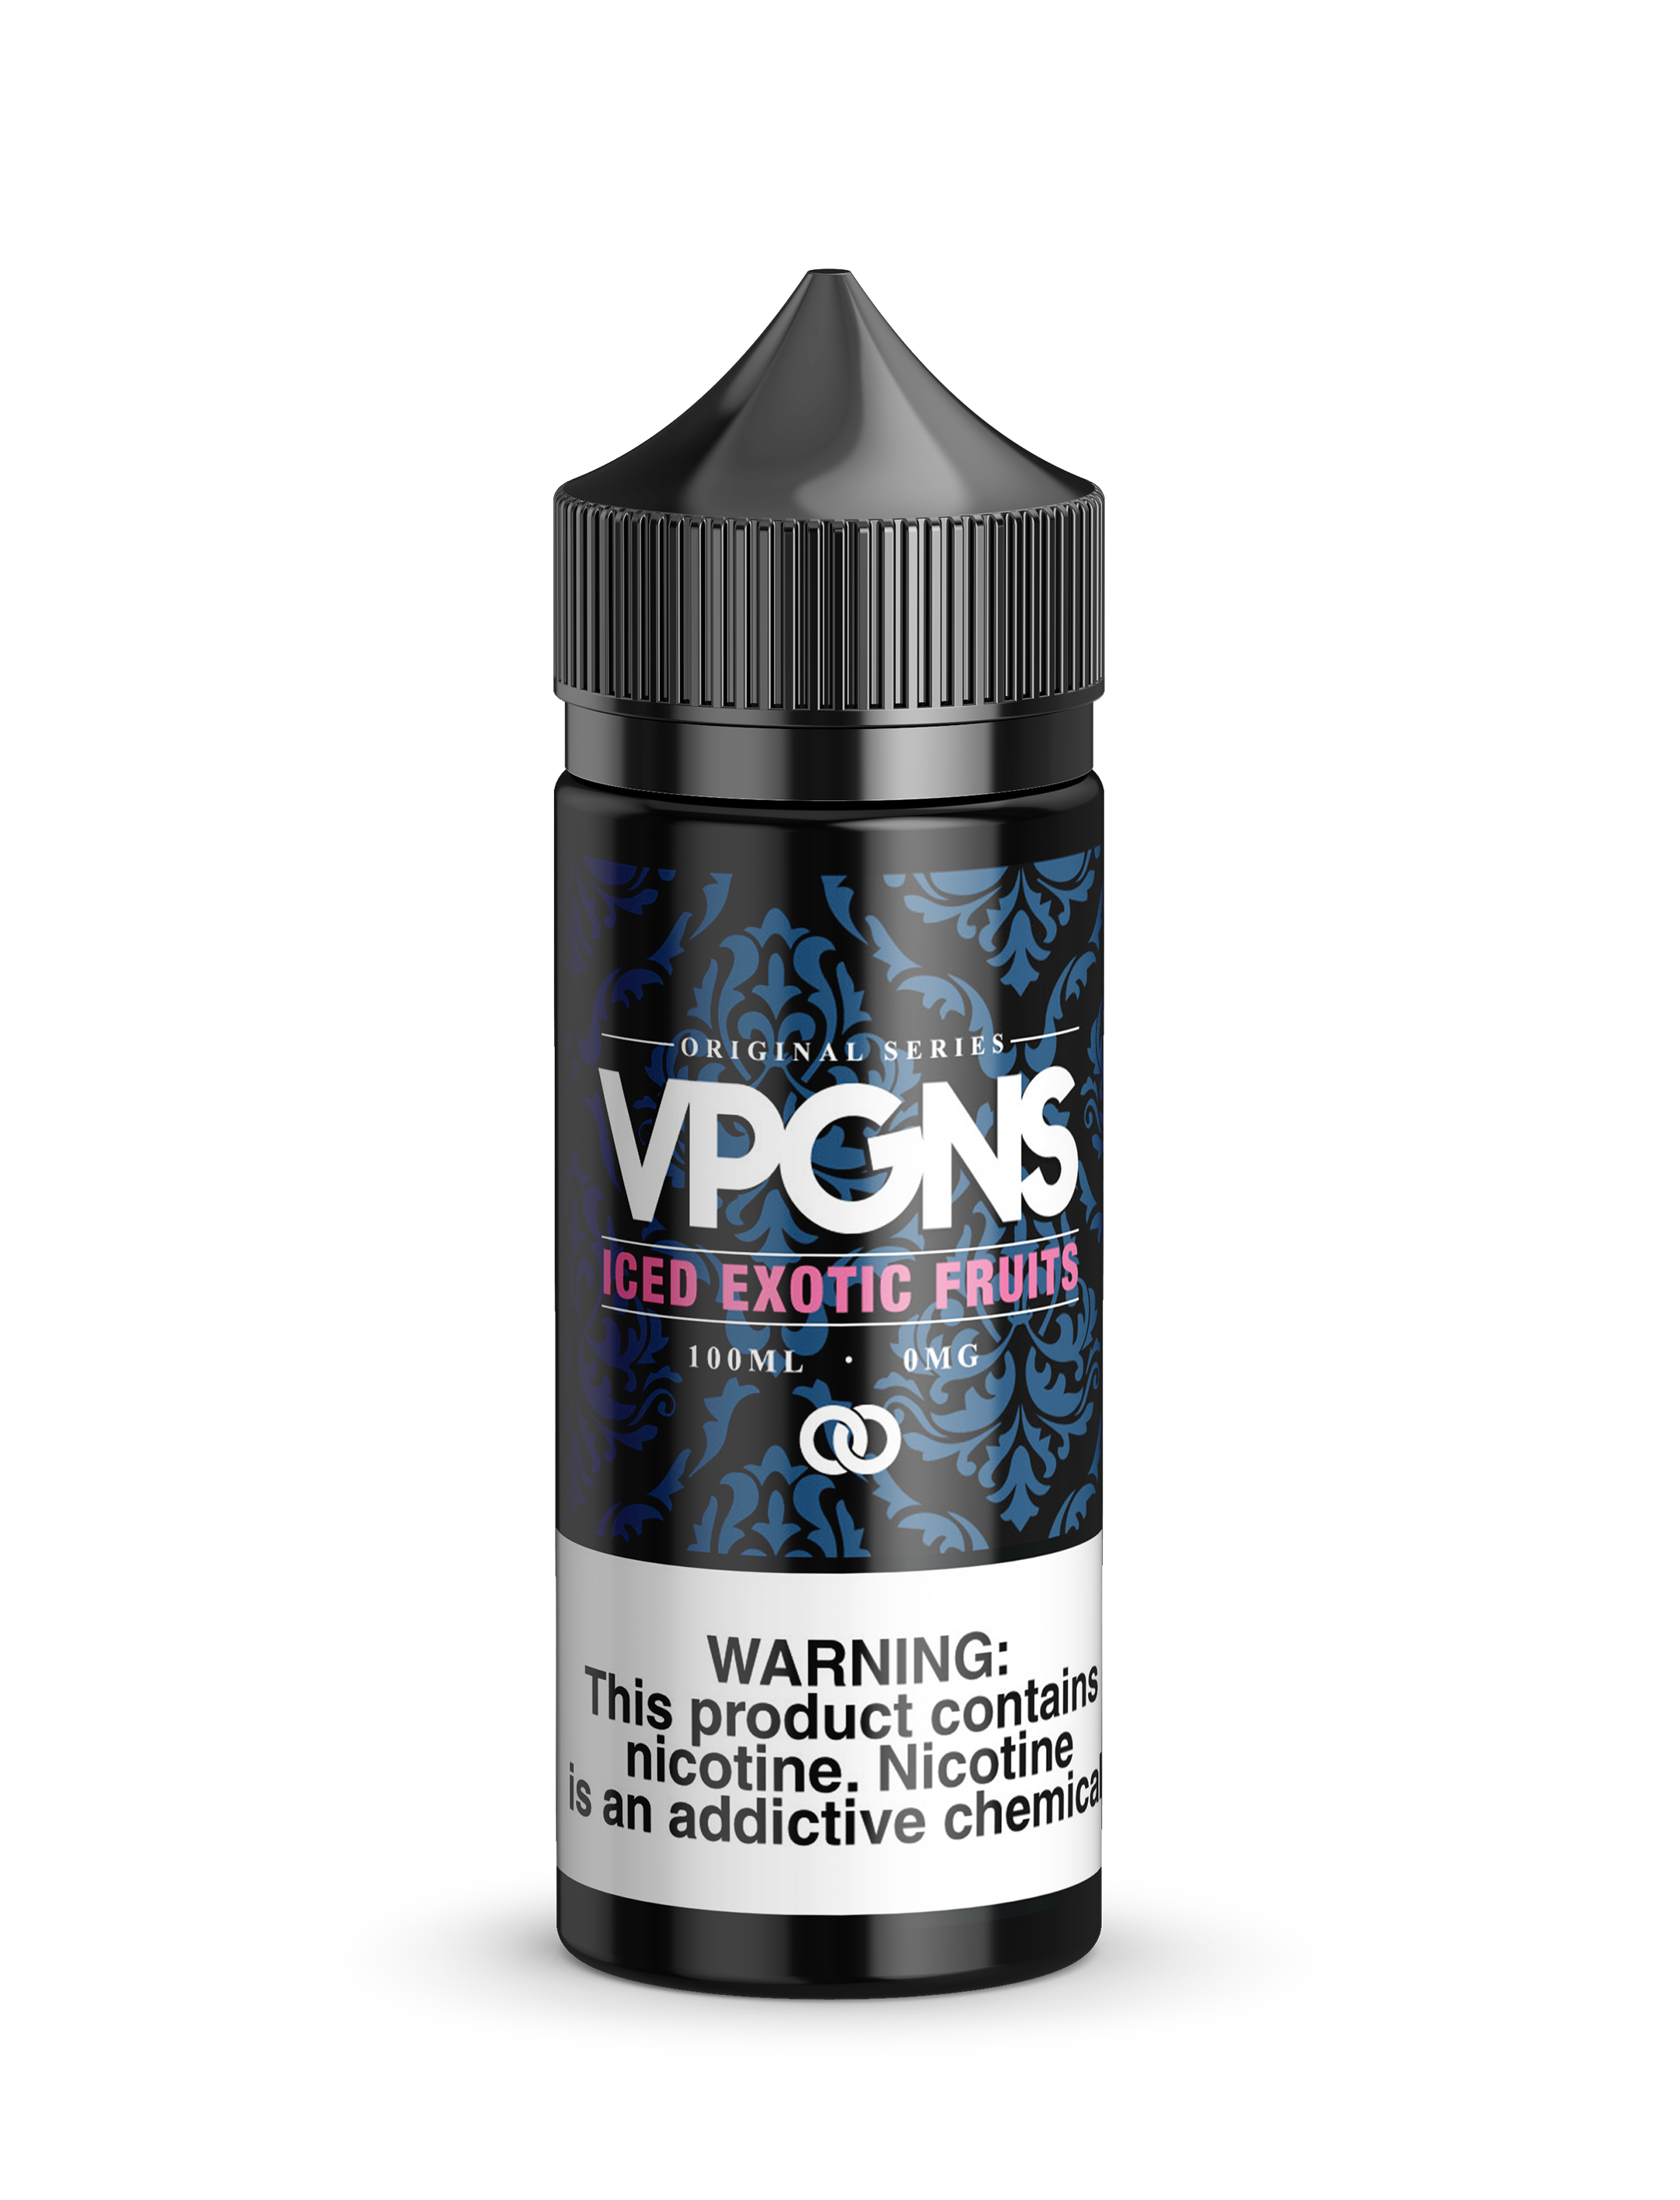 VPGNS-ICED EXOTIC FRUITS 100ML